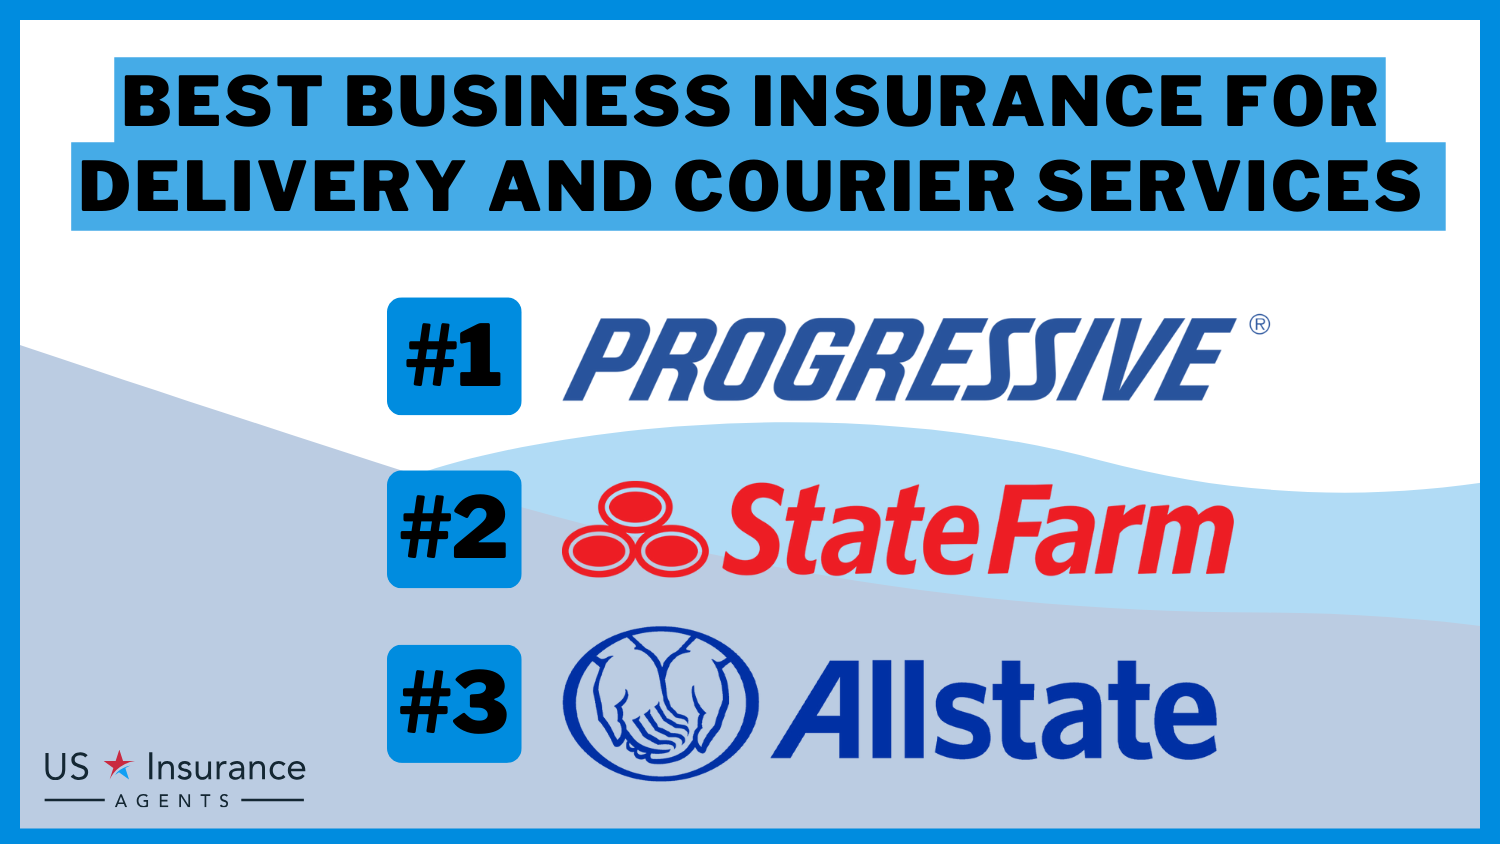 Progressive, State Farm, Allstate: Best Business Insurance for Delivery and Courier Services